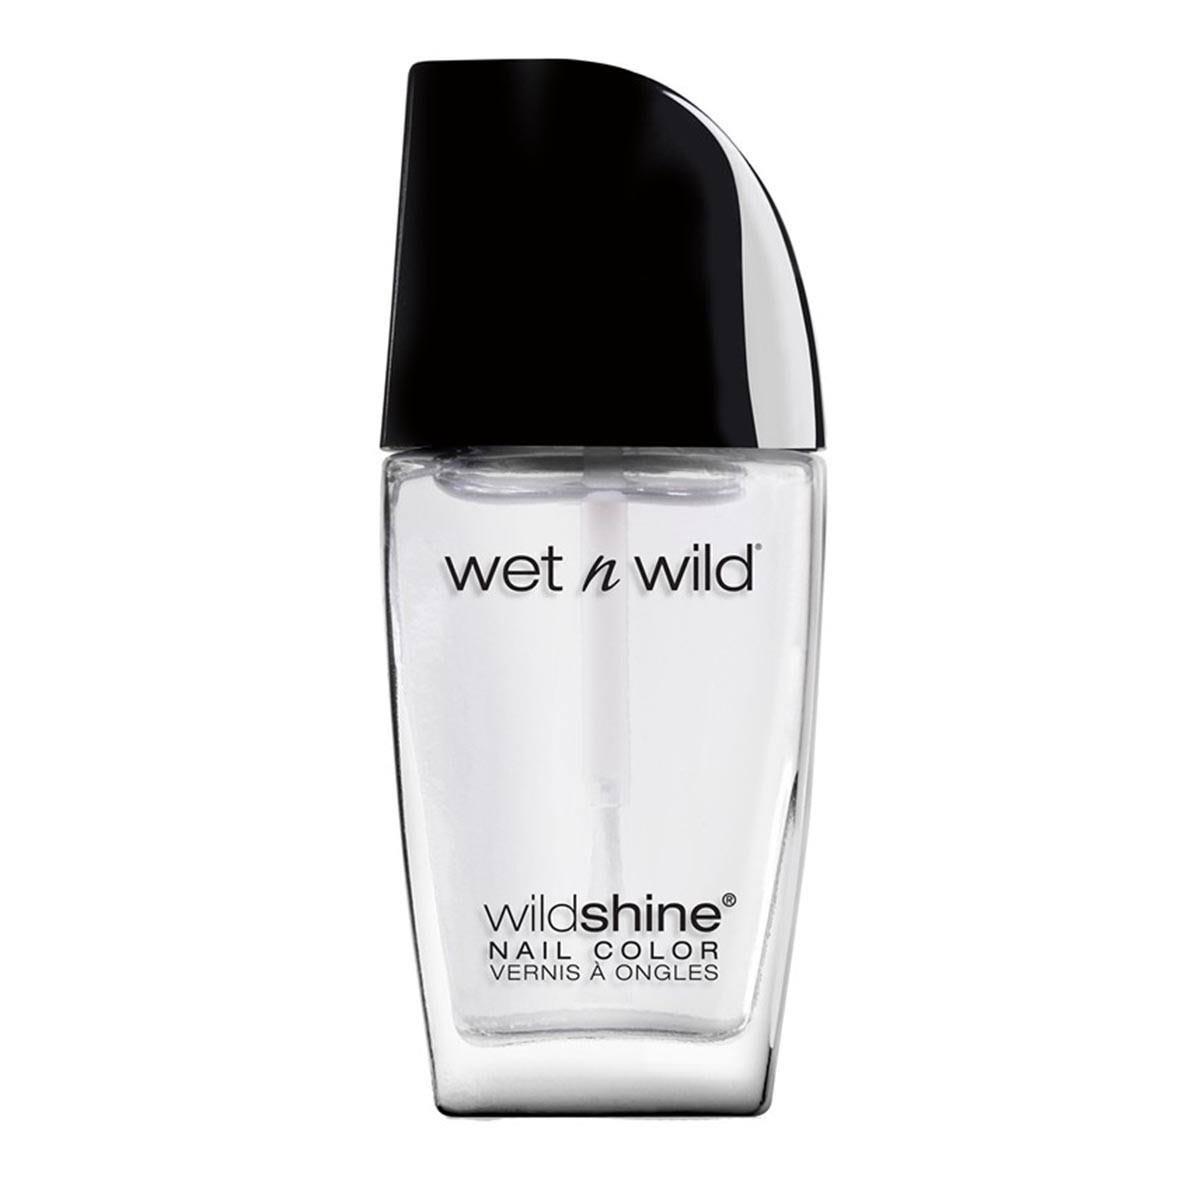 Wet N Wild Wildshine Clear Nail Color Nail Protector